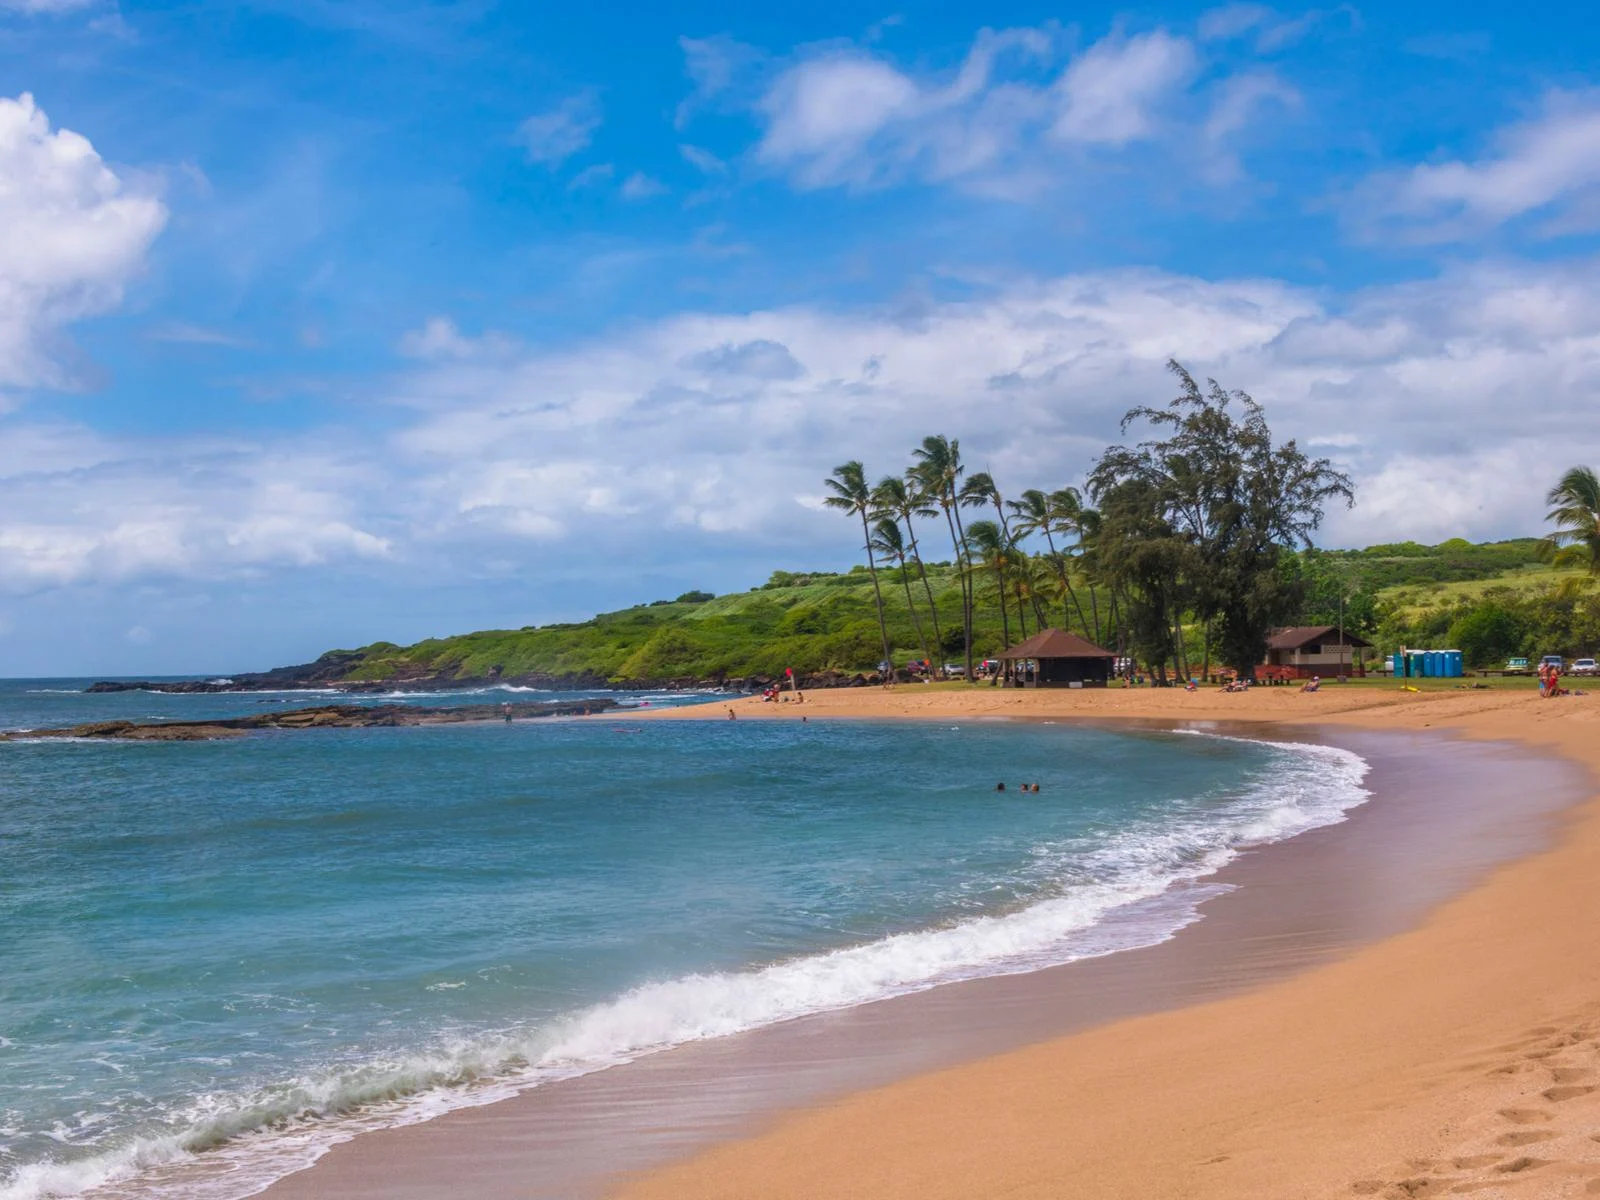 Three tourists swimming in the turquoise waters of Salt Pond Beach, considered one of the best beaches in Kauai, onshore are two beach houses beside palm trees